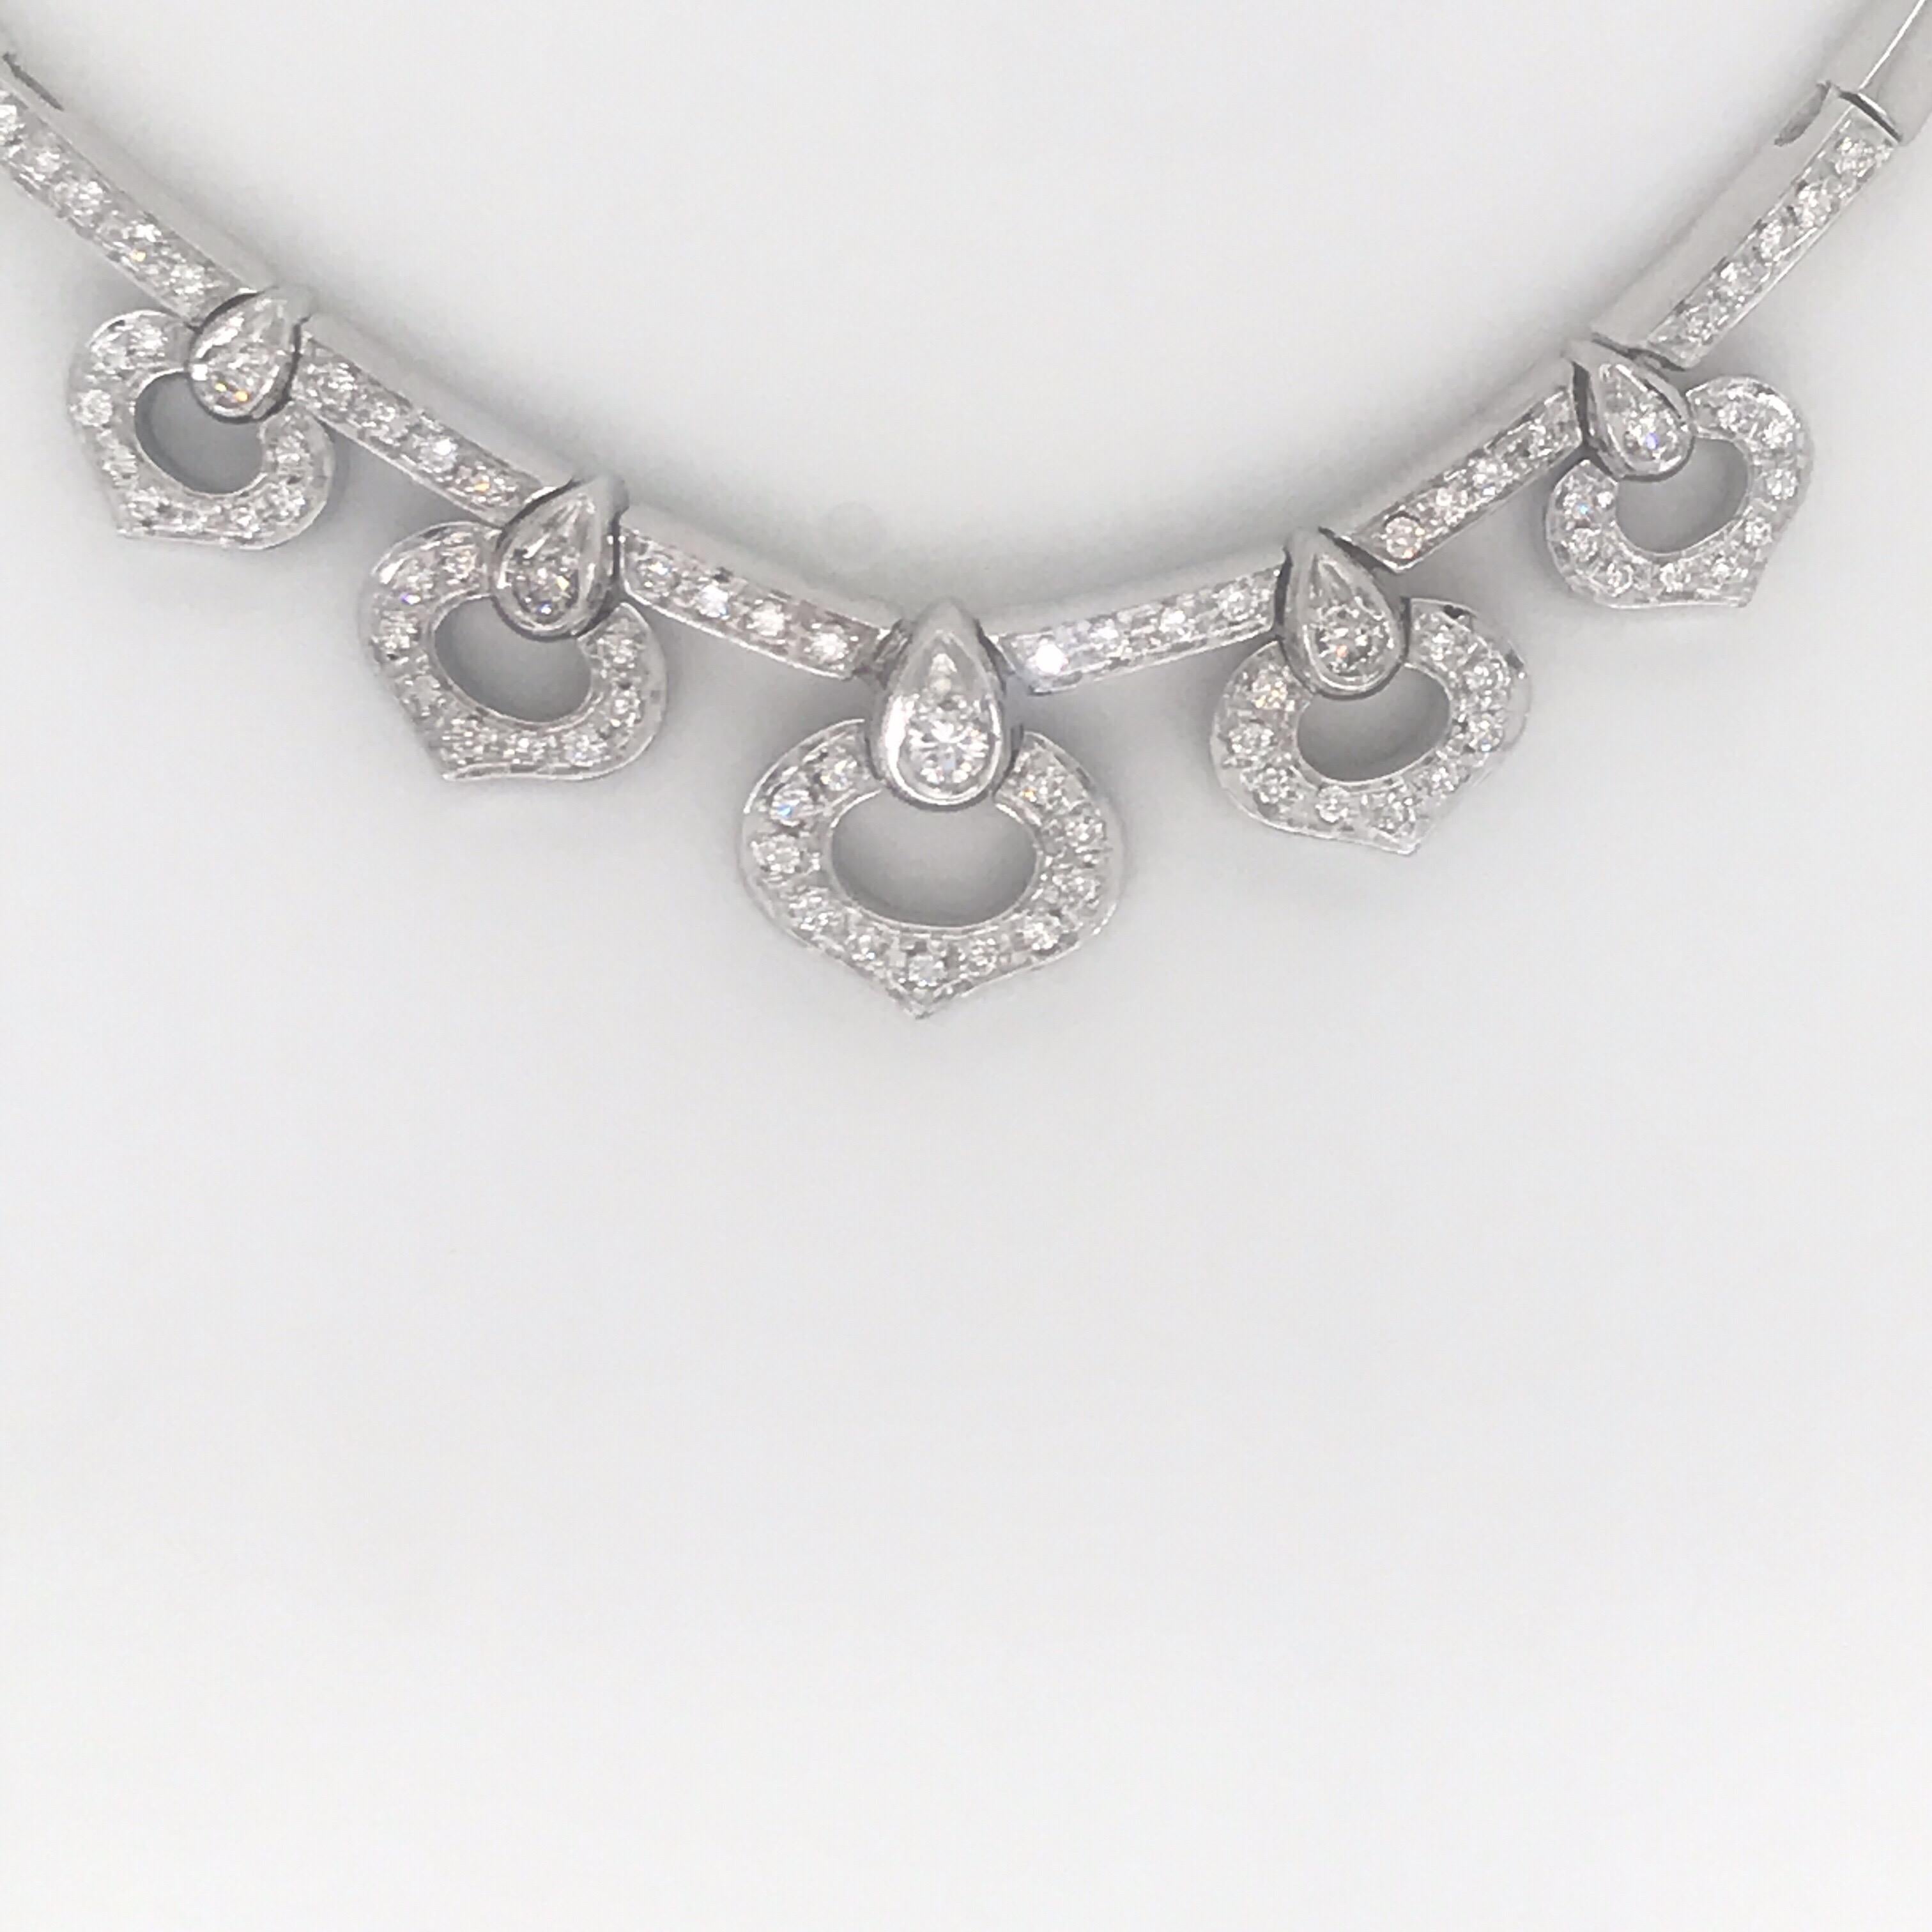 14K White gold necklace featuring 5 diamond drops weighing approximately 1 carat on a bar link chain. 
Color H
Clarity SI 